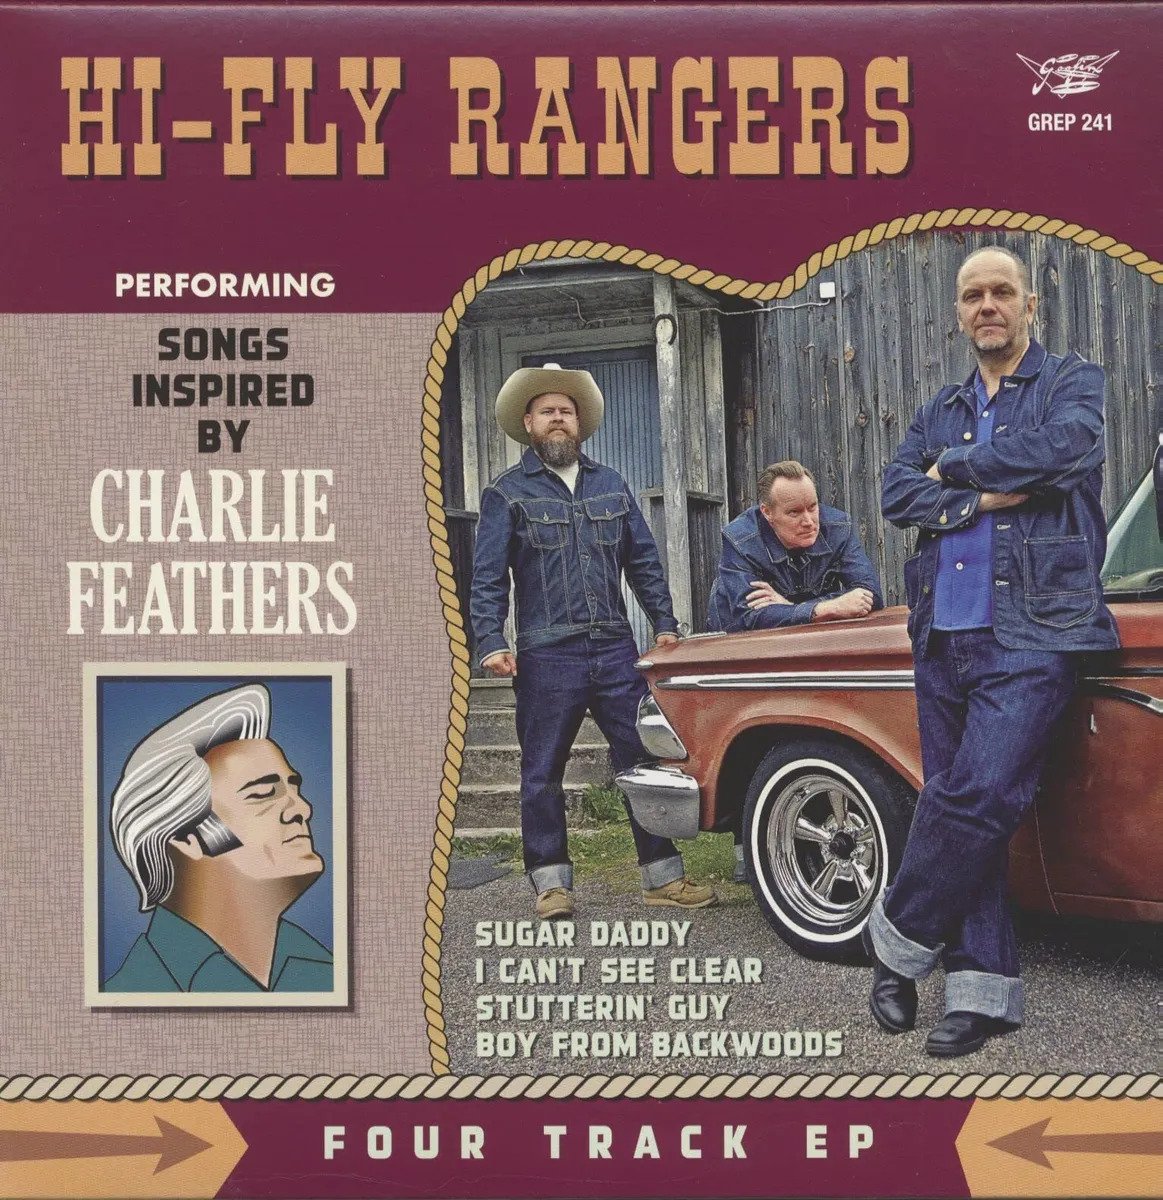 CD Shop - HI-FLY RANGERS 7-PERFORMING SONGS INSPIRED BY CHARLIE FEATHERS